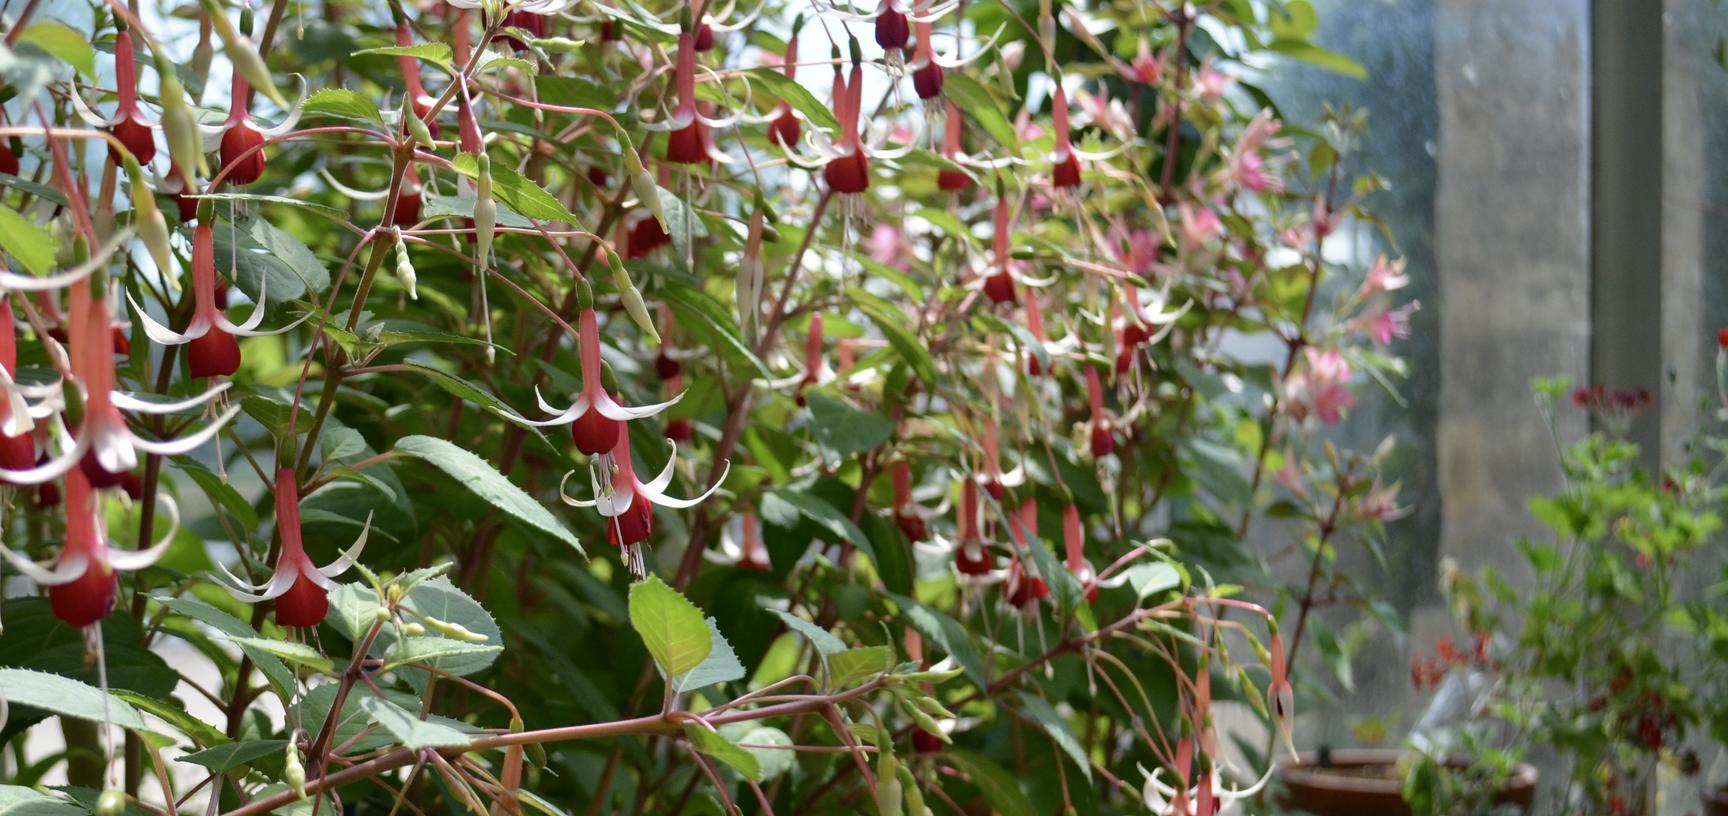 Fuchsia Display in the Conservatory